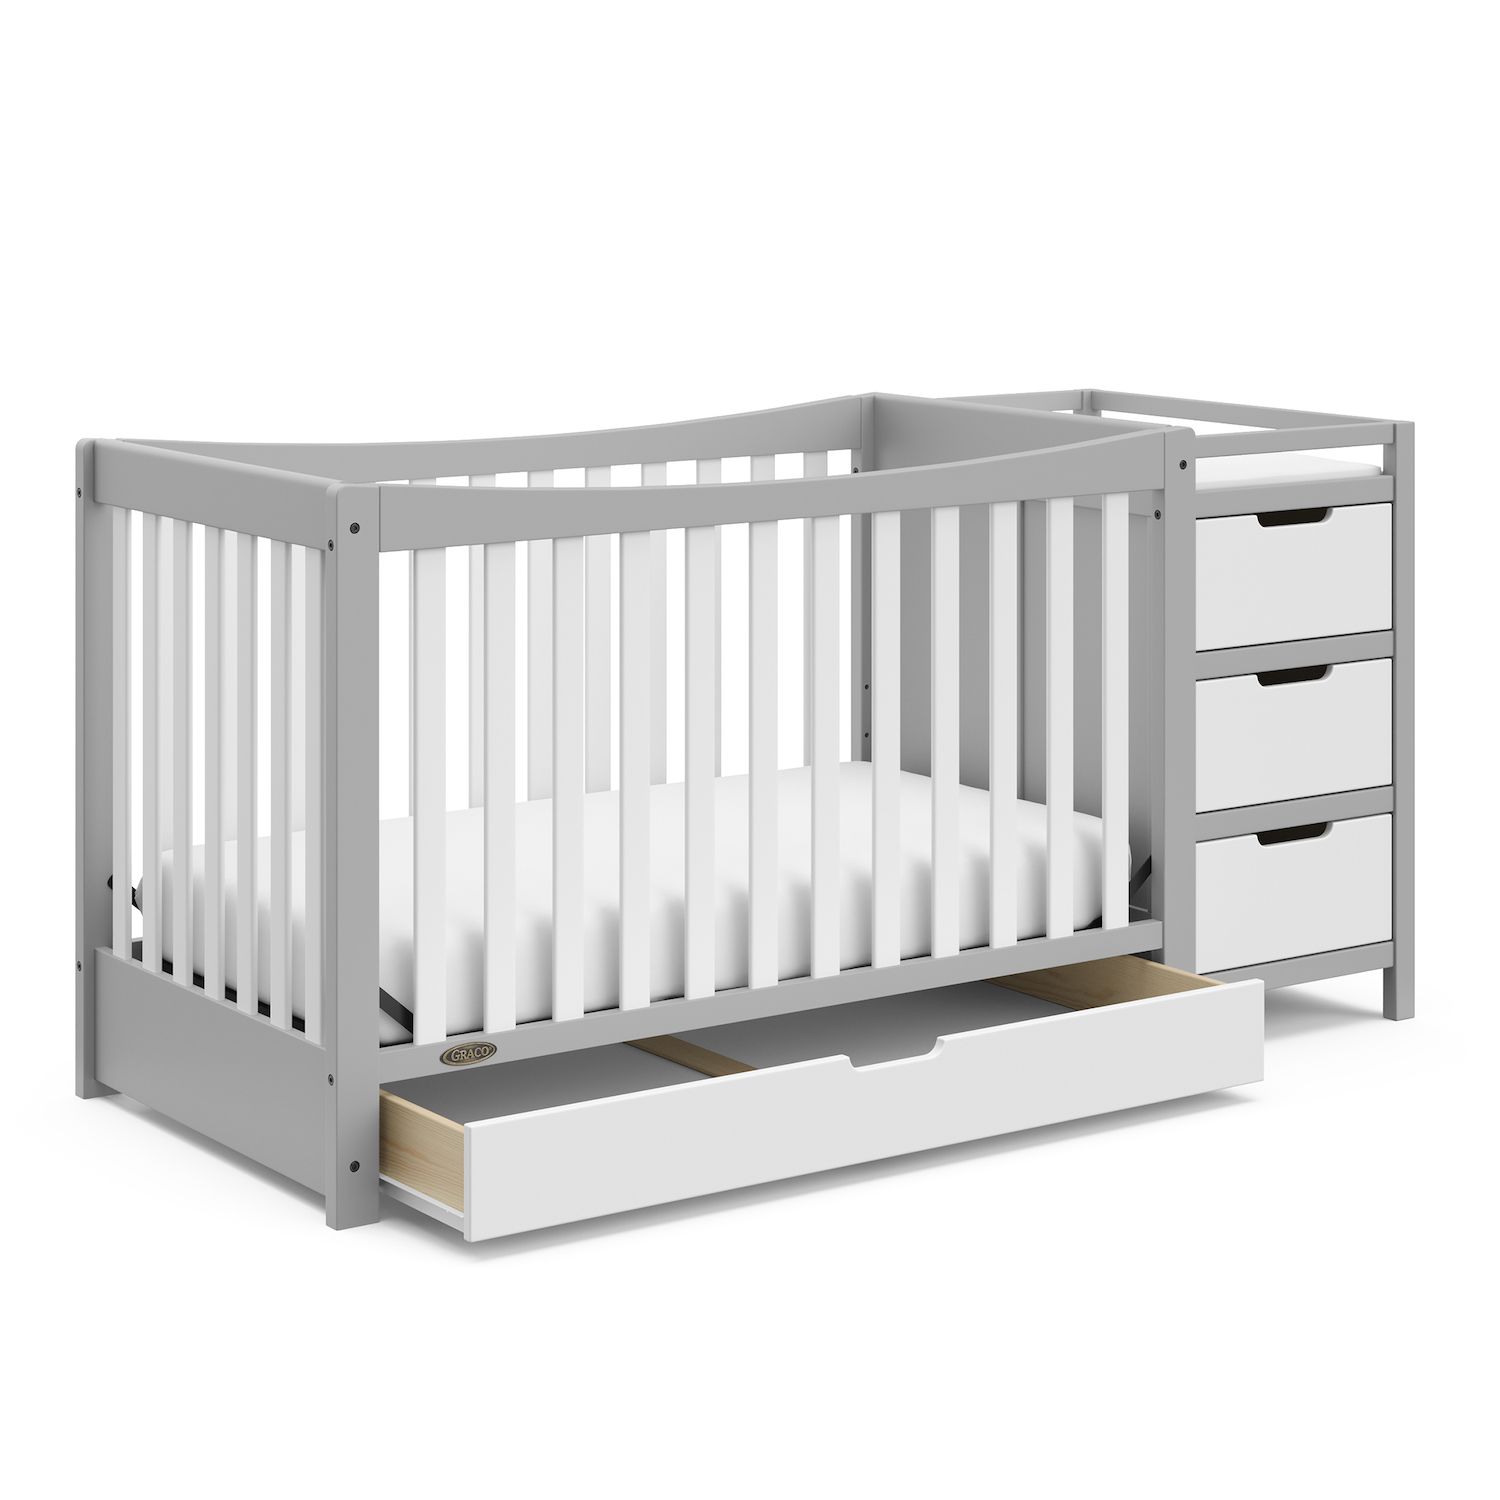 graco solano 4 in 1 convertible crib with drawer pebble gray